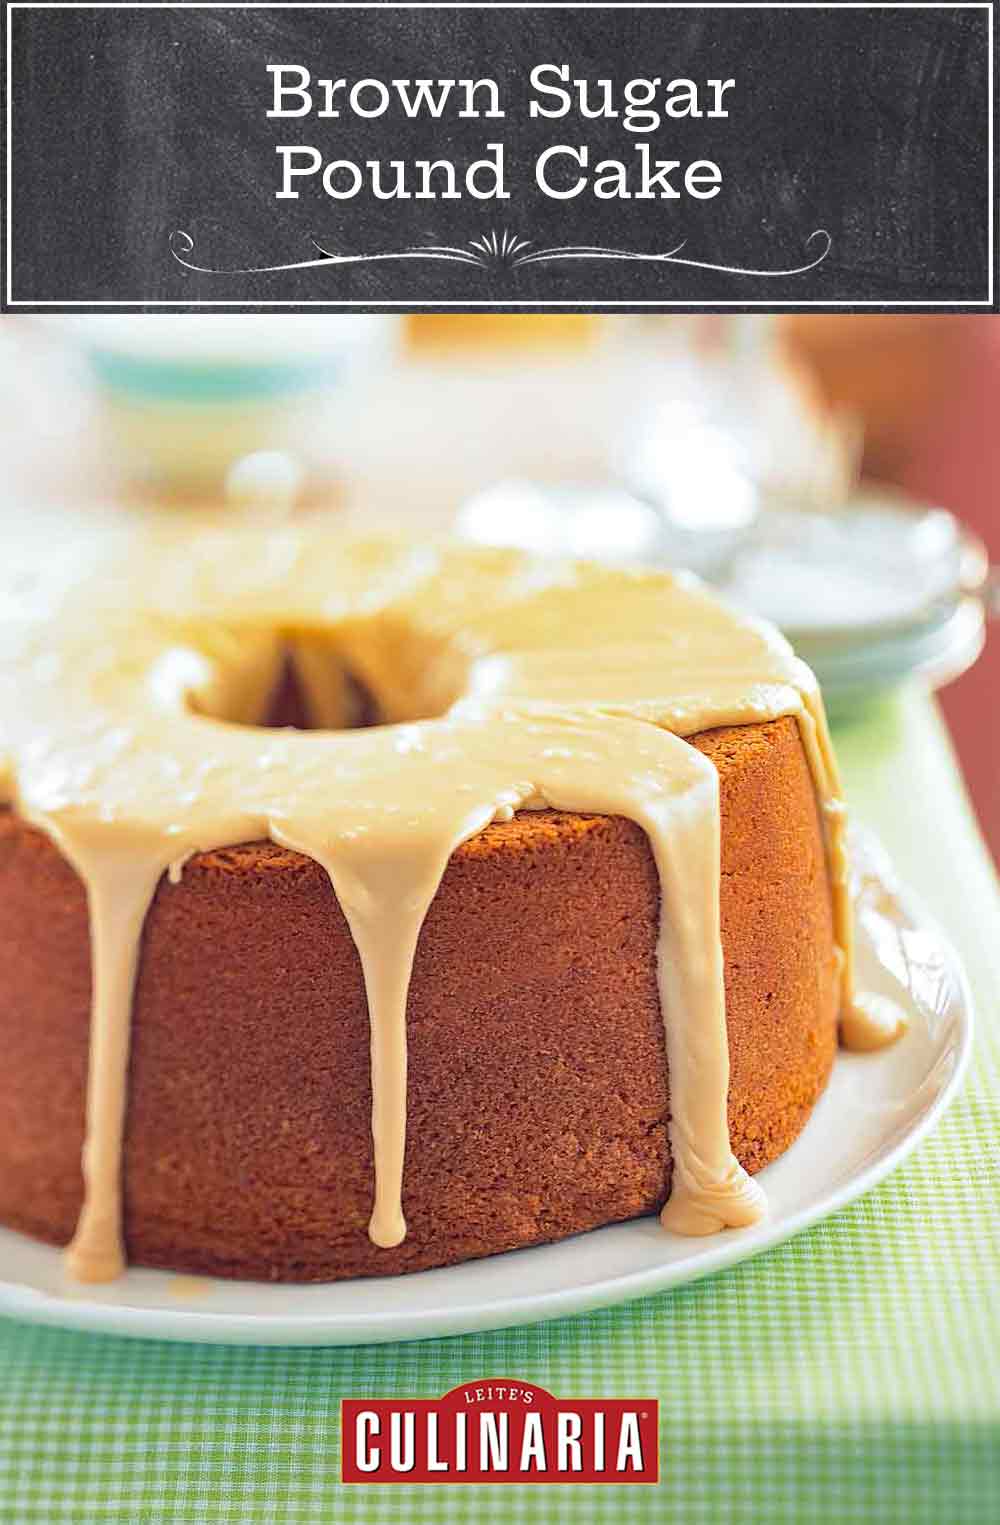 A frosted brown sugar pound cake on a white plate on a cloth-covered picnic table.